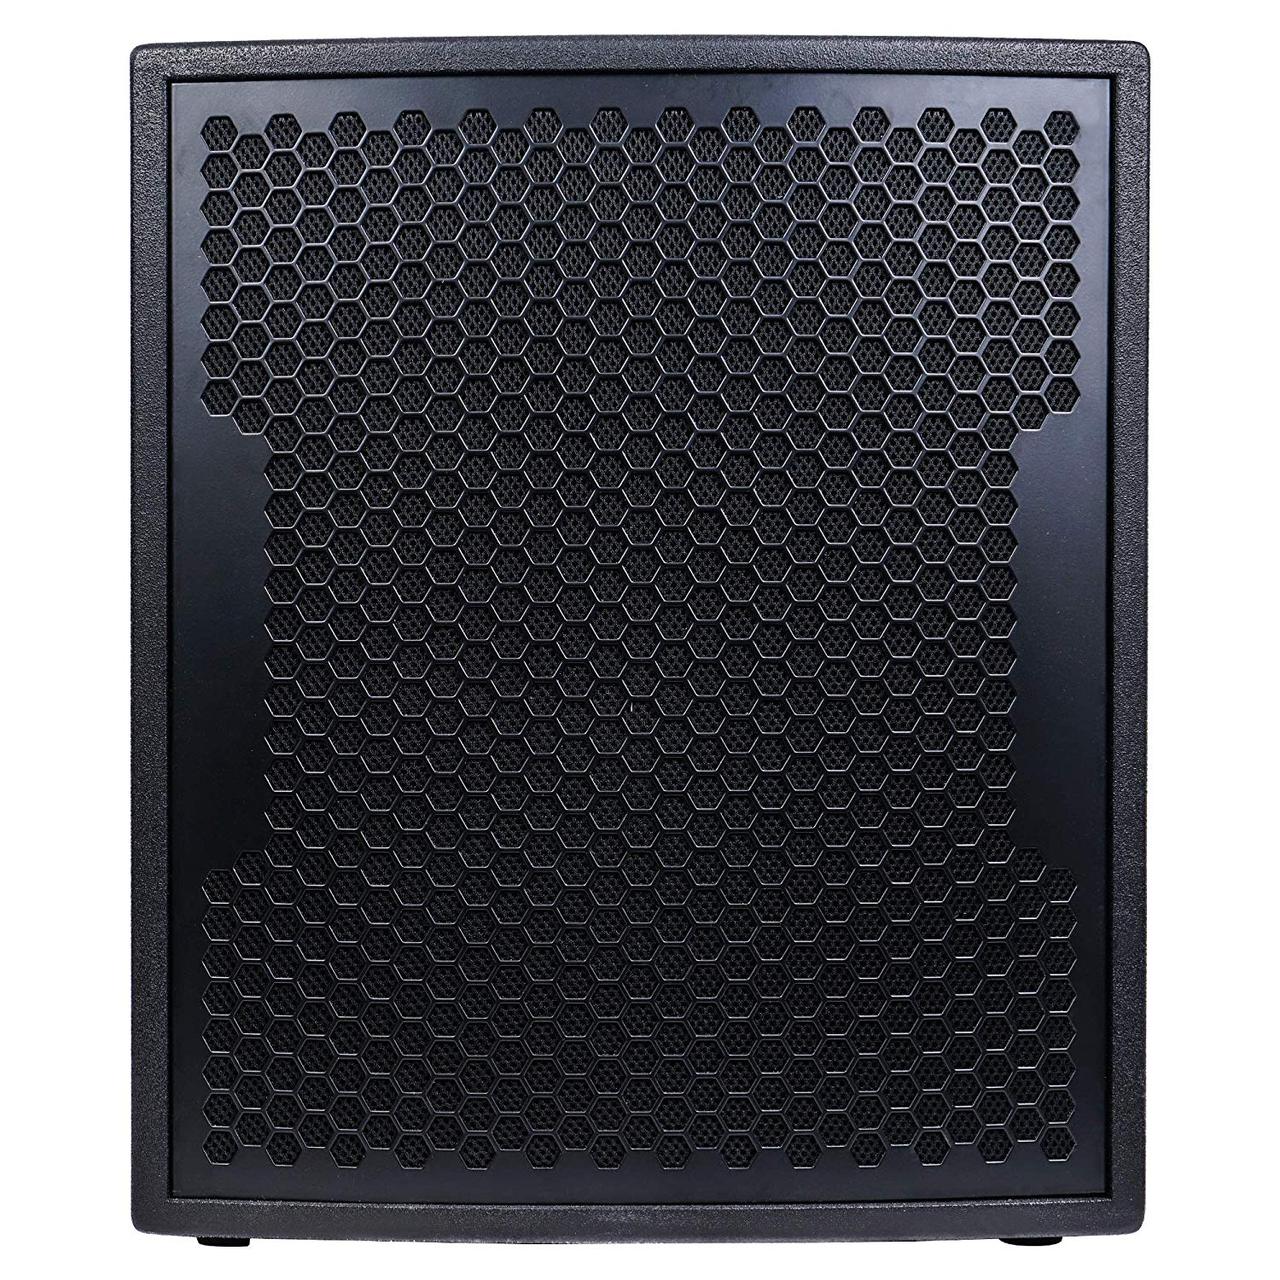 Sound Town 1600 Watts 15” Powered Subwoofer with 2 Speaker Outputs, Plywood Enclosure and 2 Wheels, Black (CARPO-15SPW) - image 2 of 6